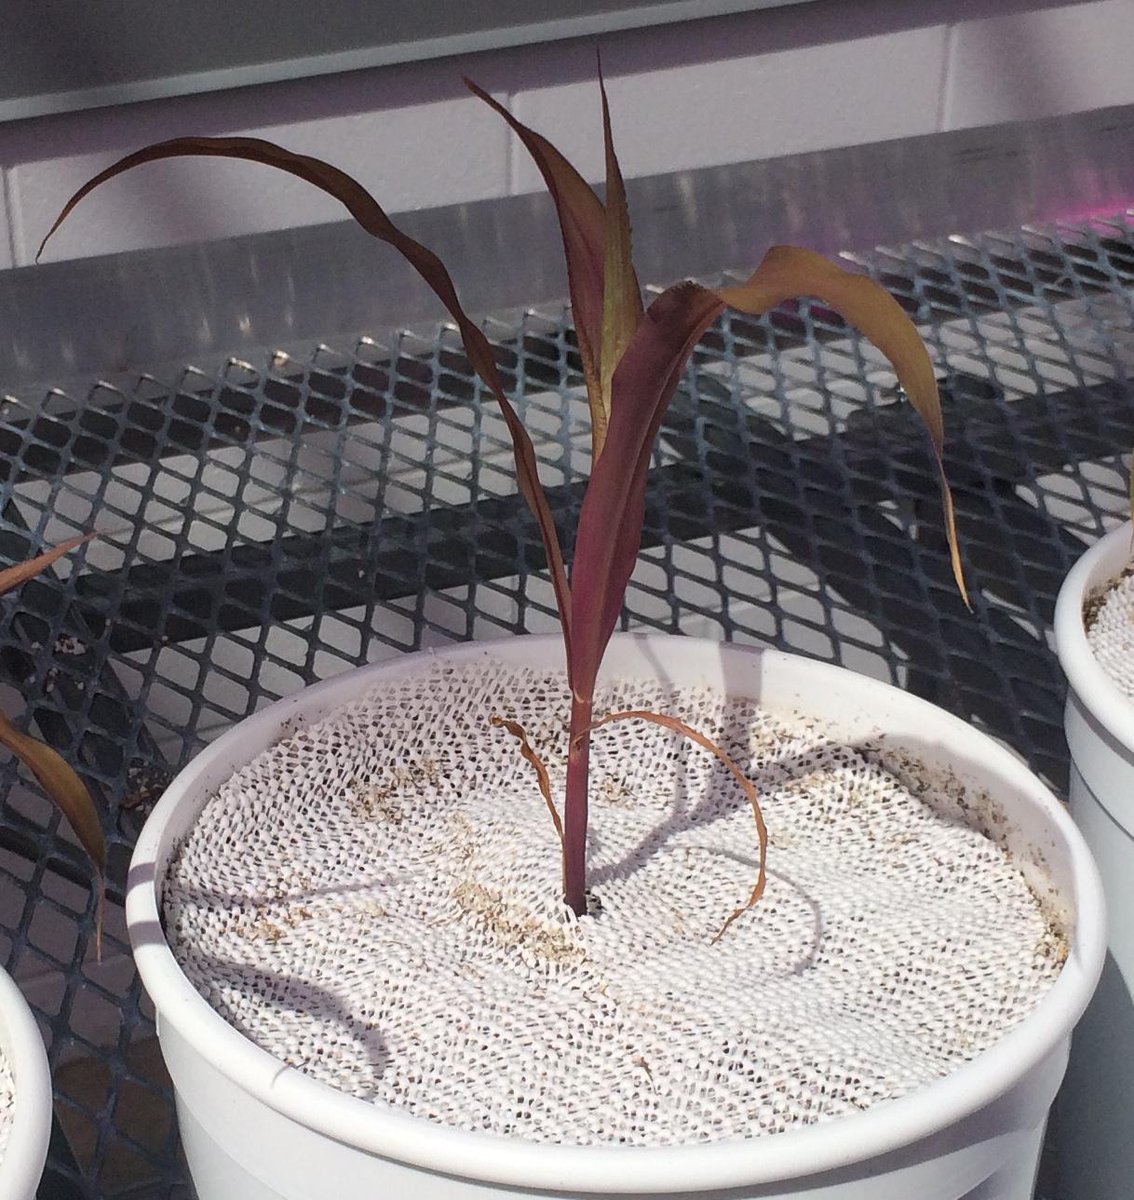 Phenotyping Attempt